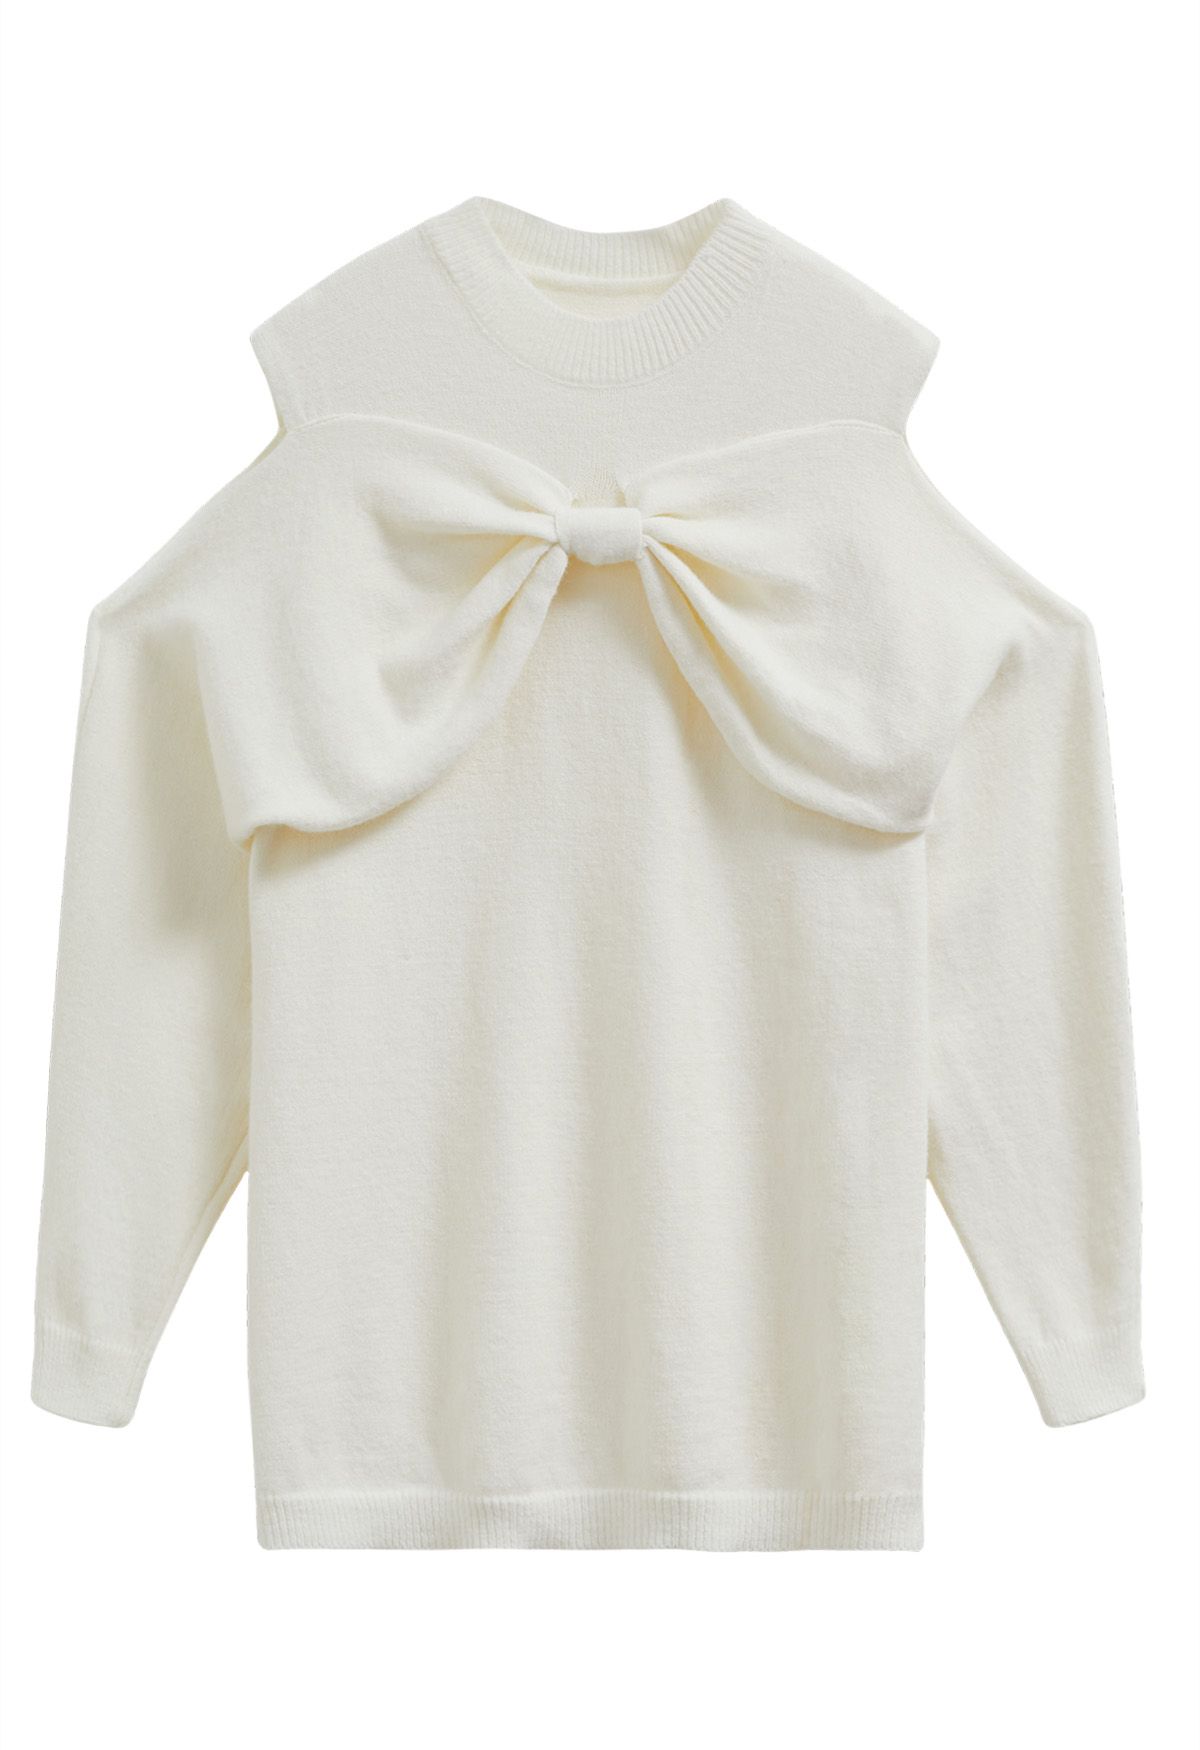 Bowknot Cold-Shoulder Knit Sweater in Cream